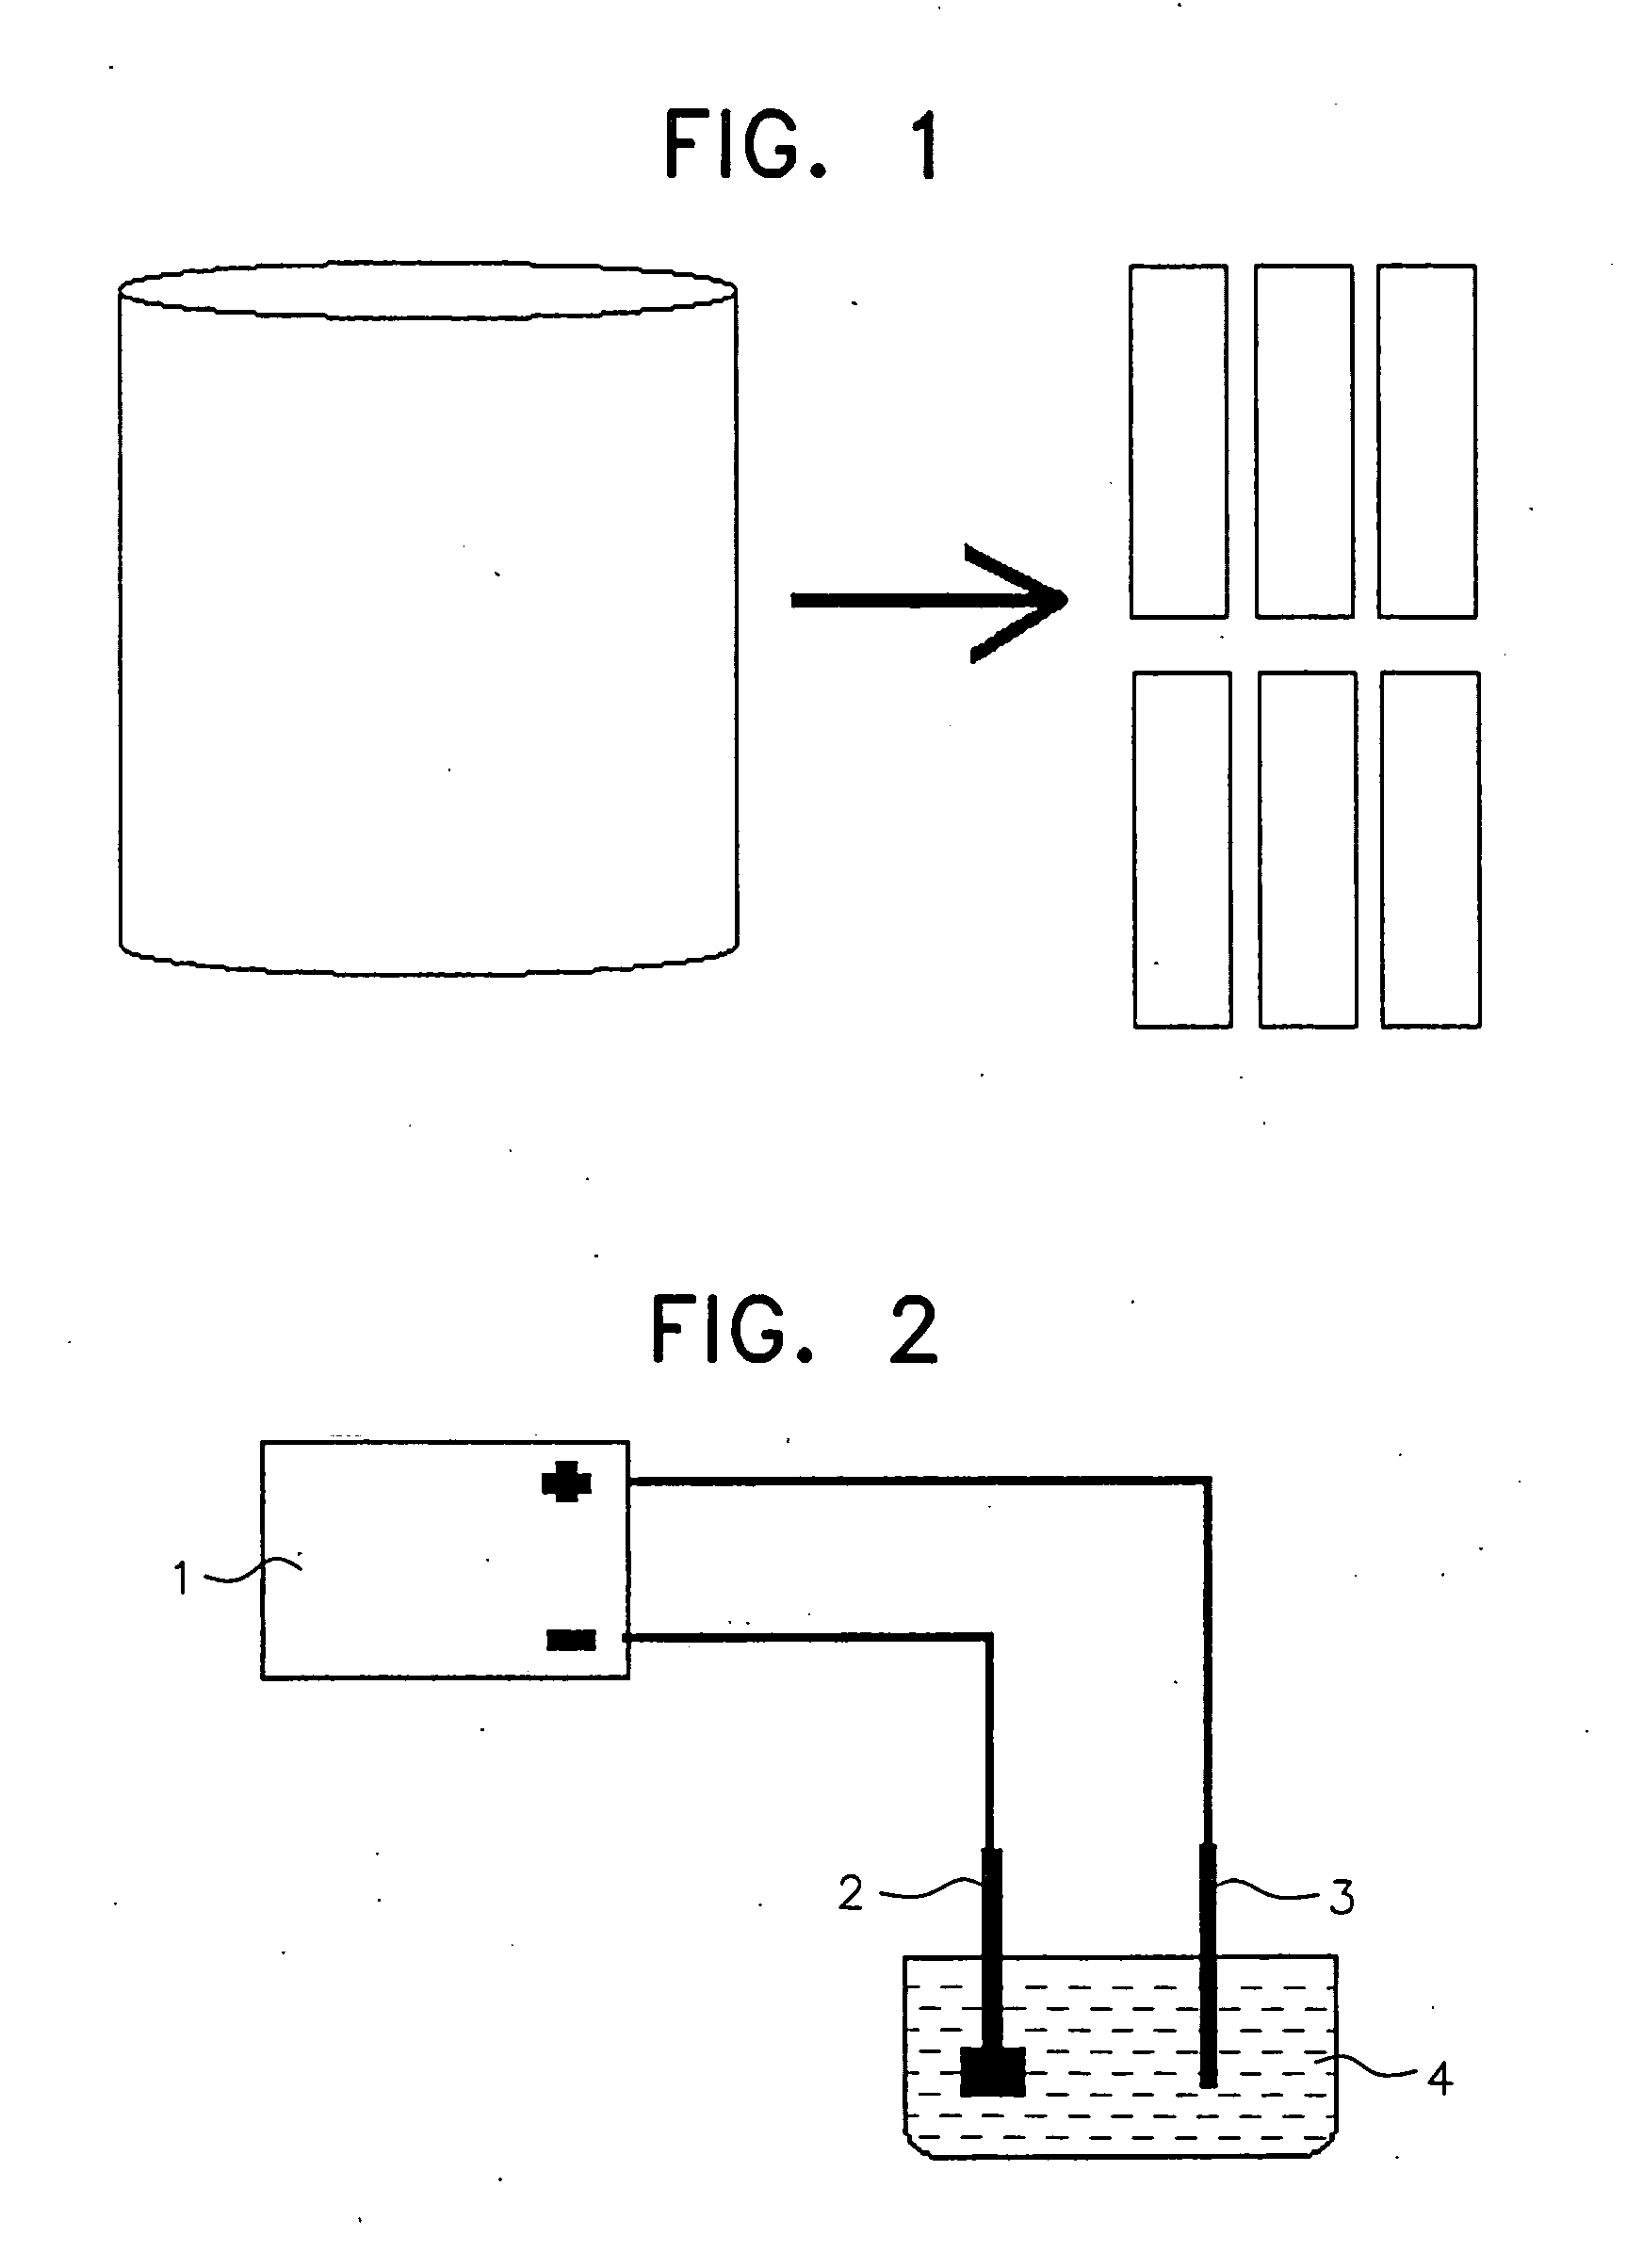 Fabrication of ceramic interface electrochemical reference electrode